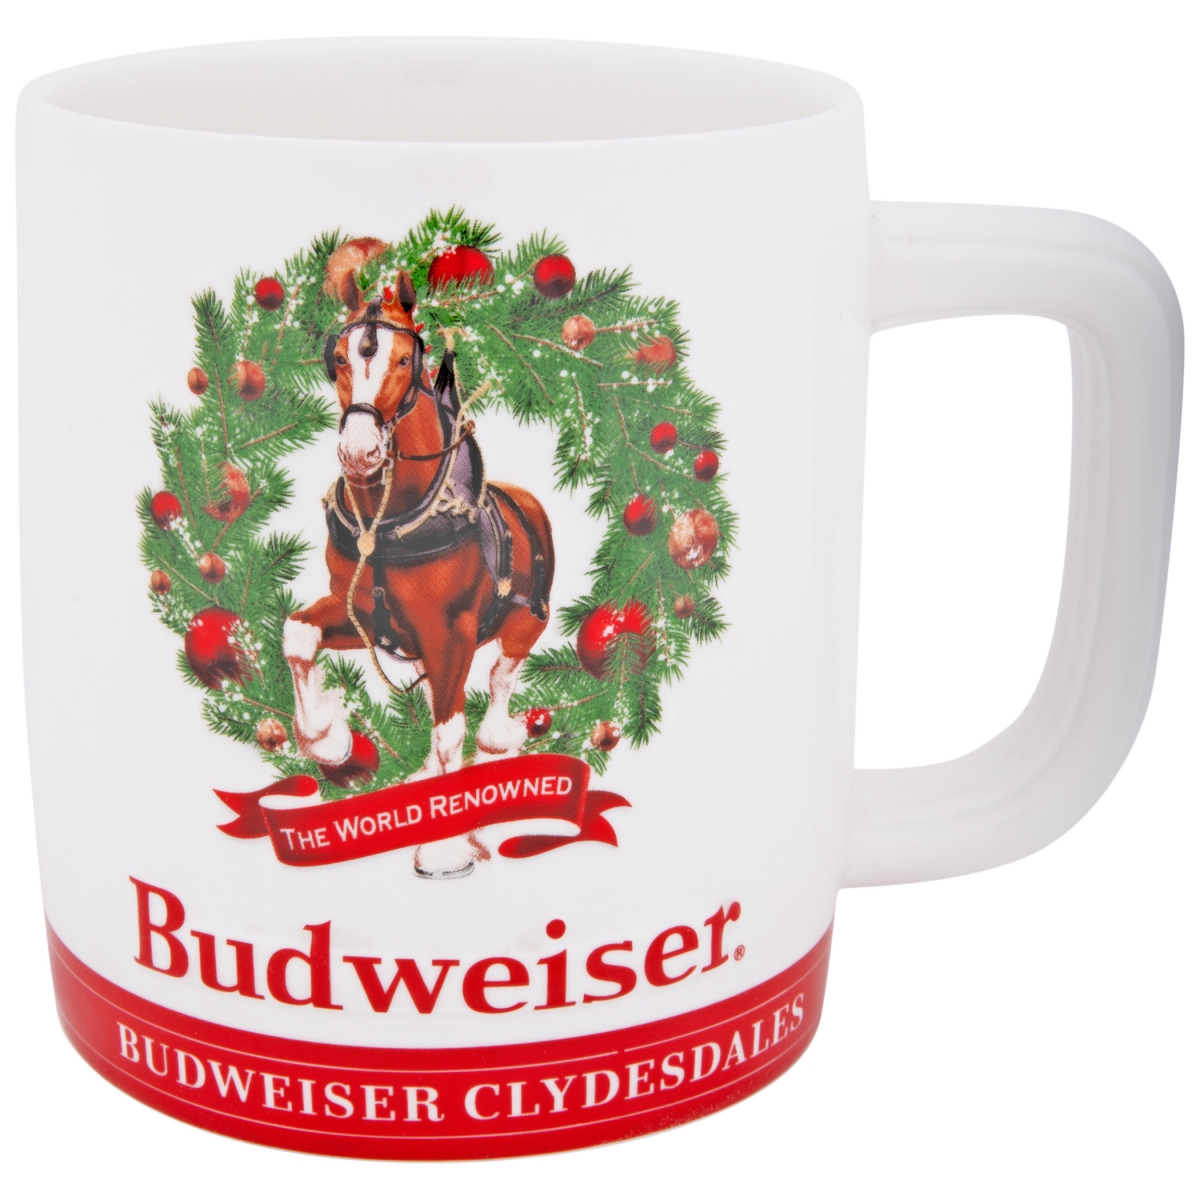 851537  Clydesdales the World-Renowned Holiday Stein Mug -  Budweiser